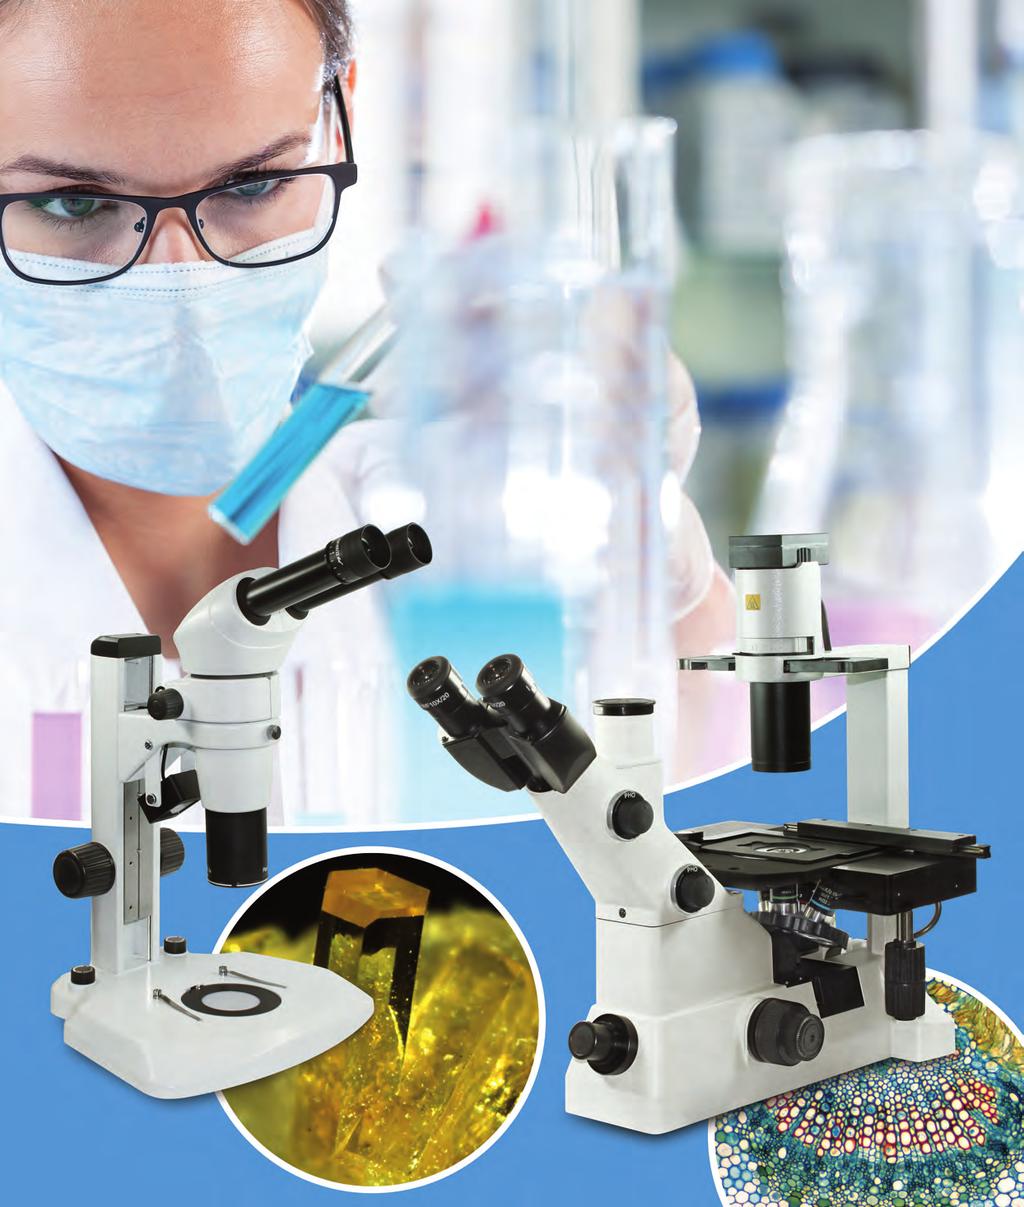 Optech microscopes